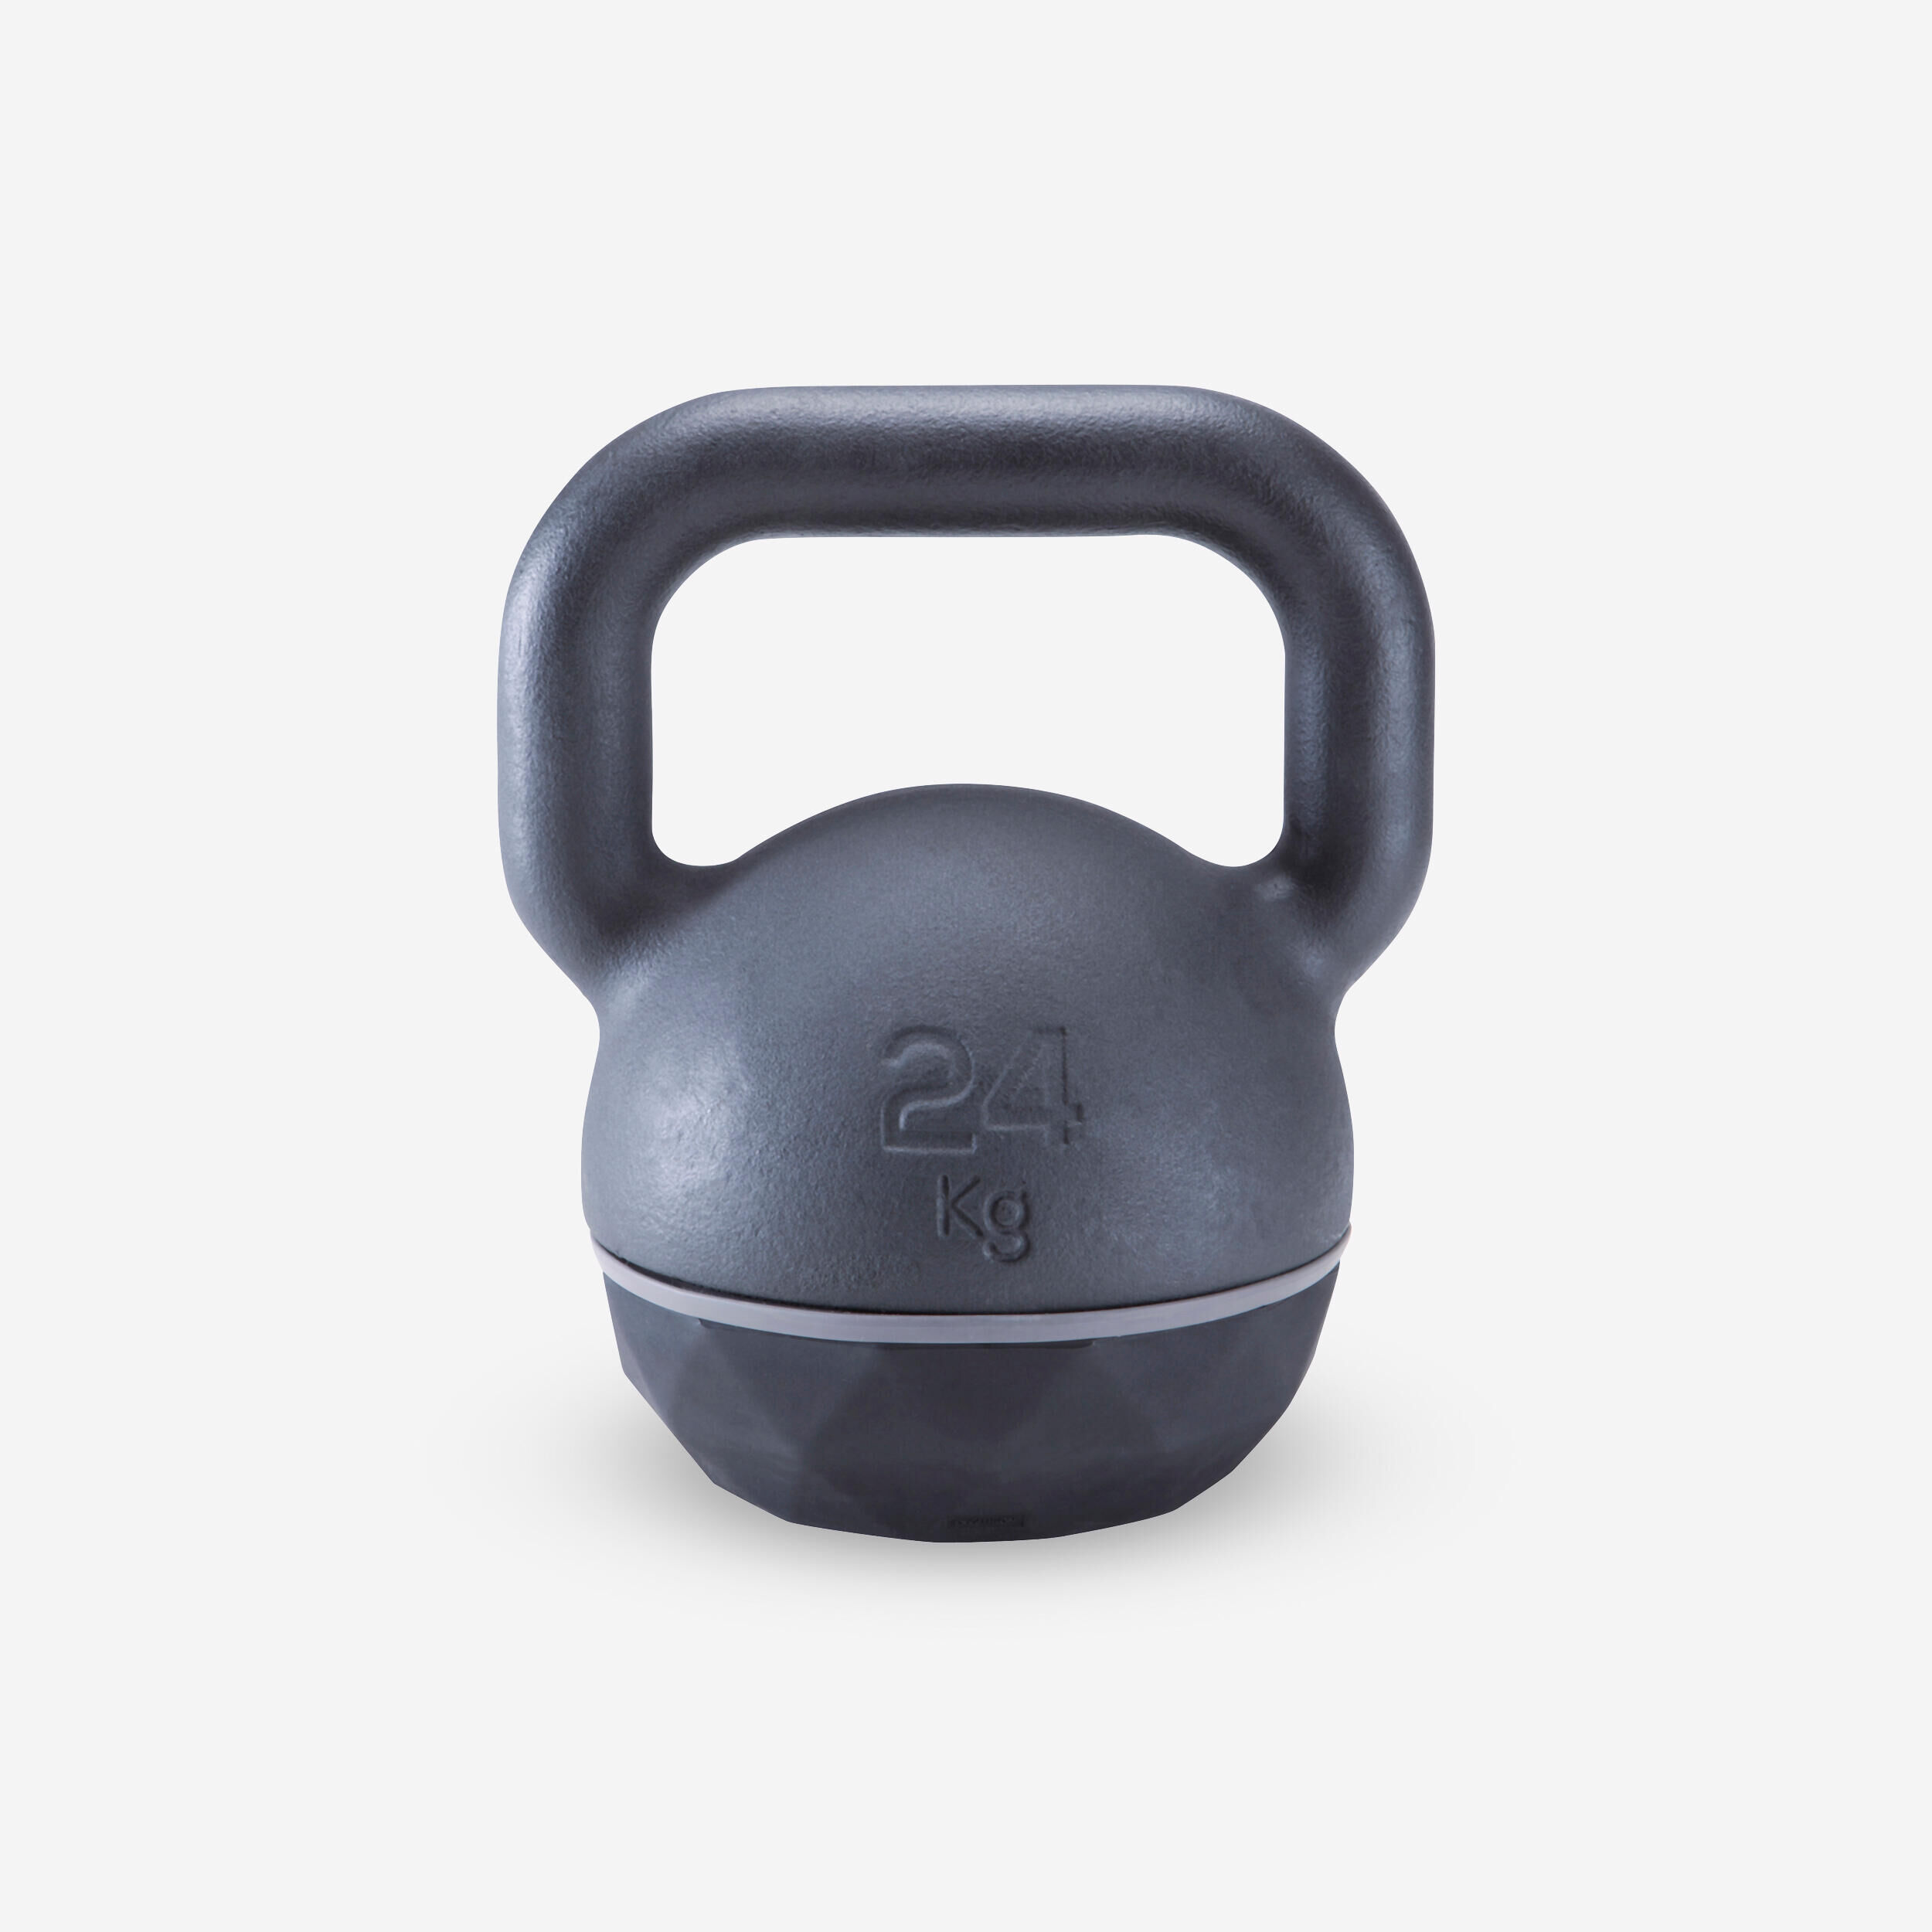 CORENGTH Cast Iron Kettlebell with Rubber Base - 24 kg